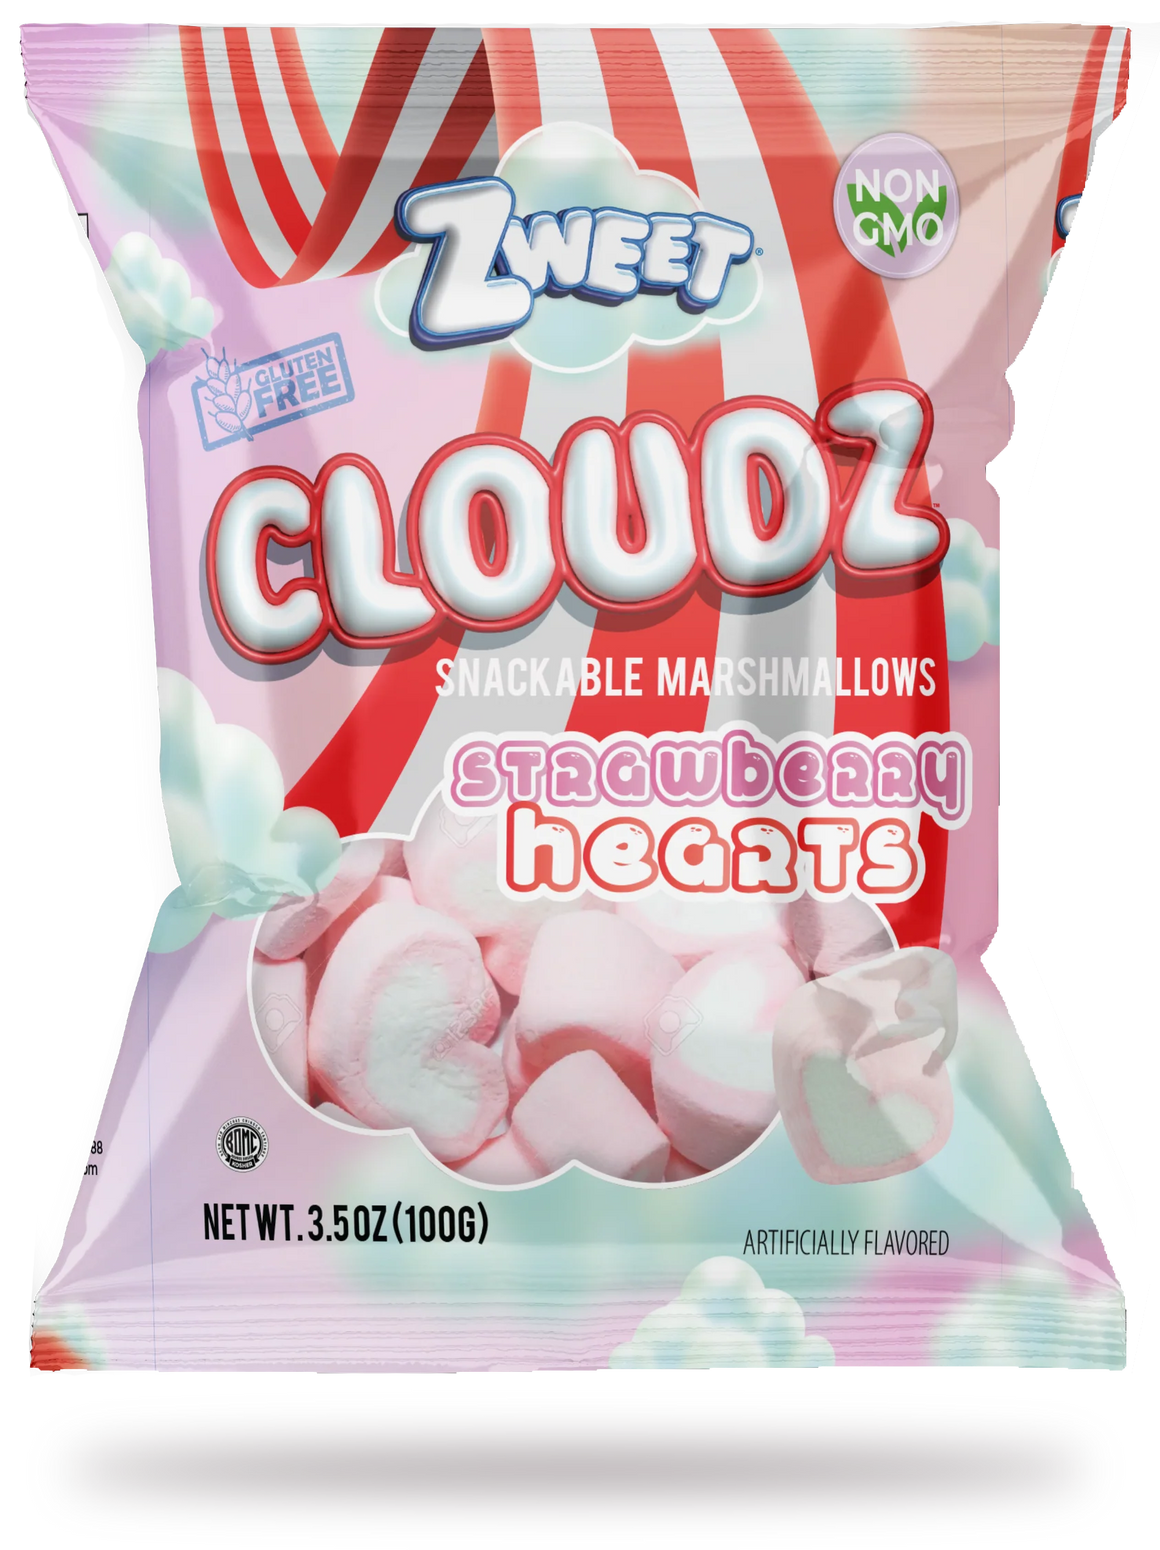 All City Candy Zweet Cloudz Strawberry Hearts Marshmallows 3.5 oz. Bag- For fresh candy and great service, visit www.allcitycandy.com